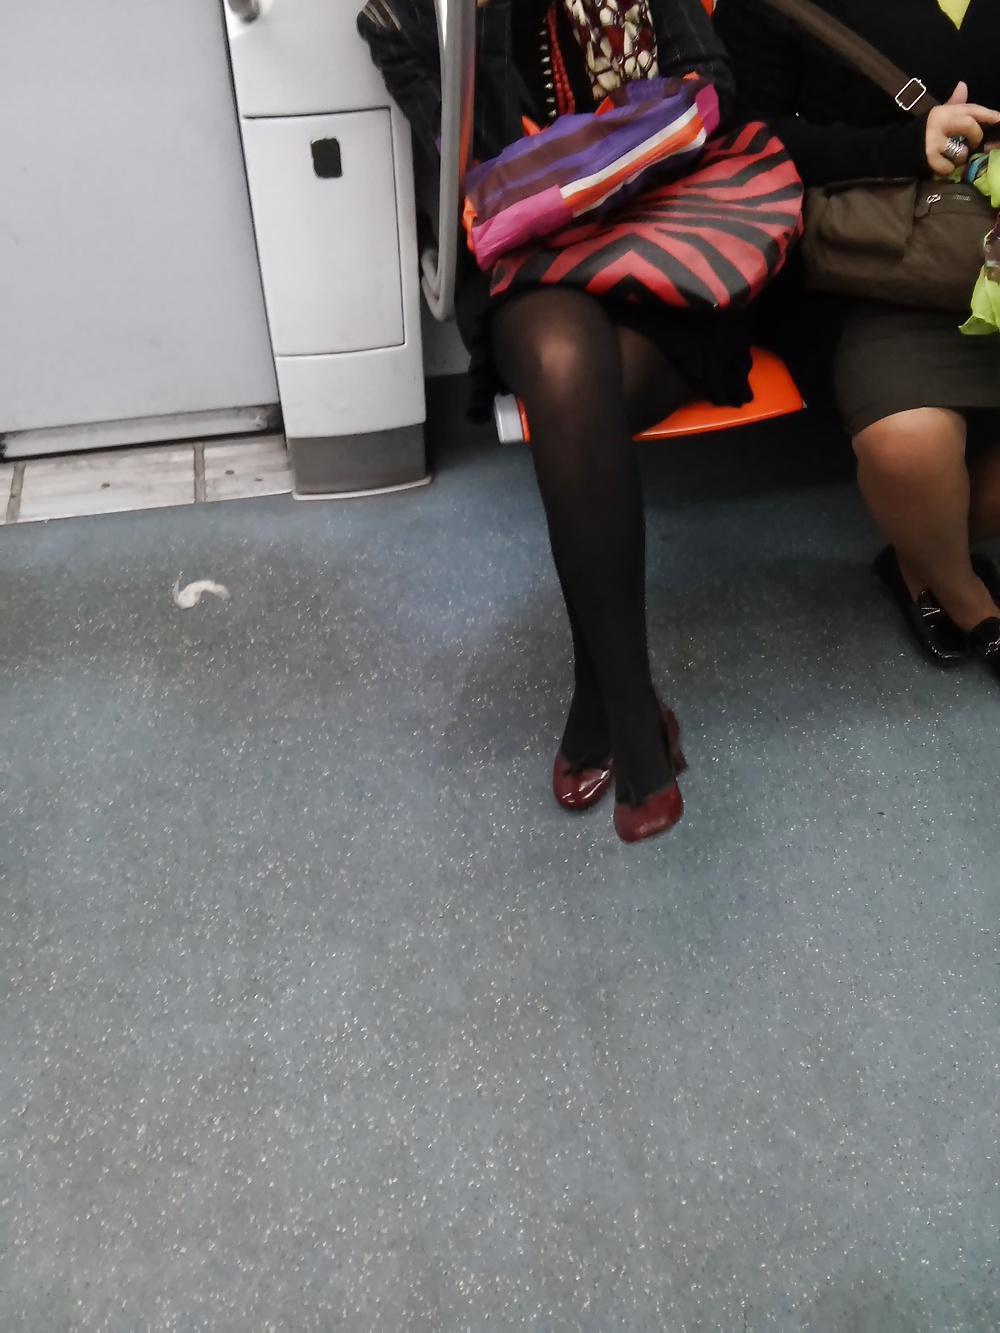 Italian (MILF) woman photographed in the subway (Italy) 2 #31402445